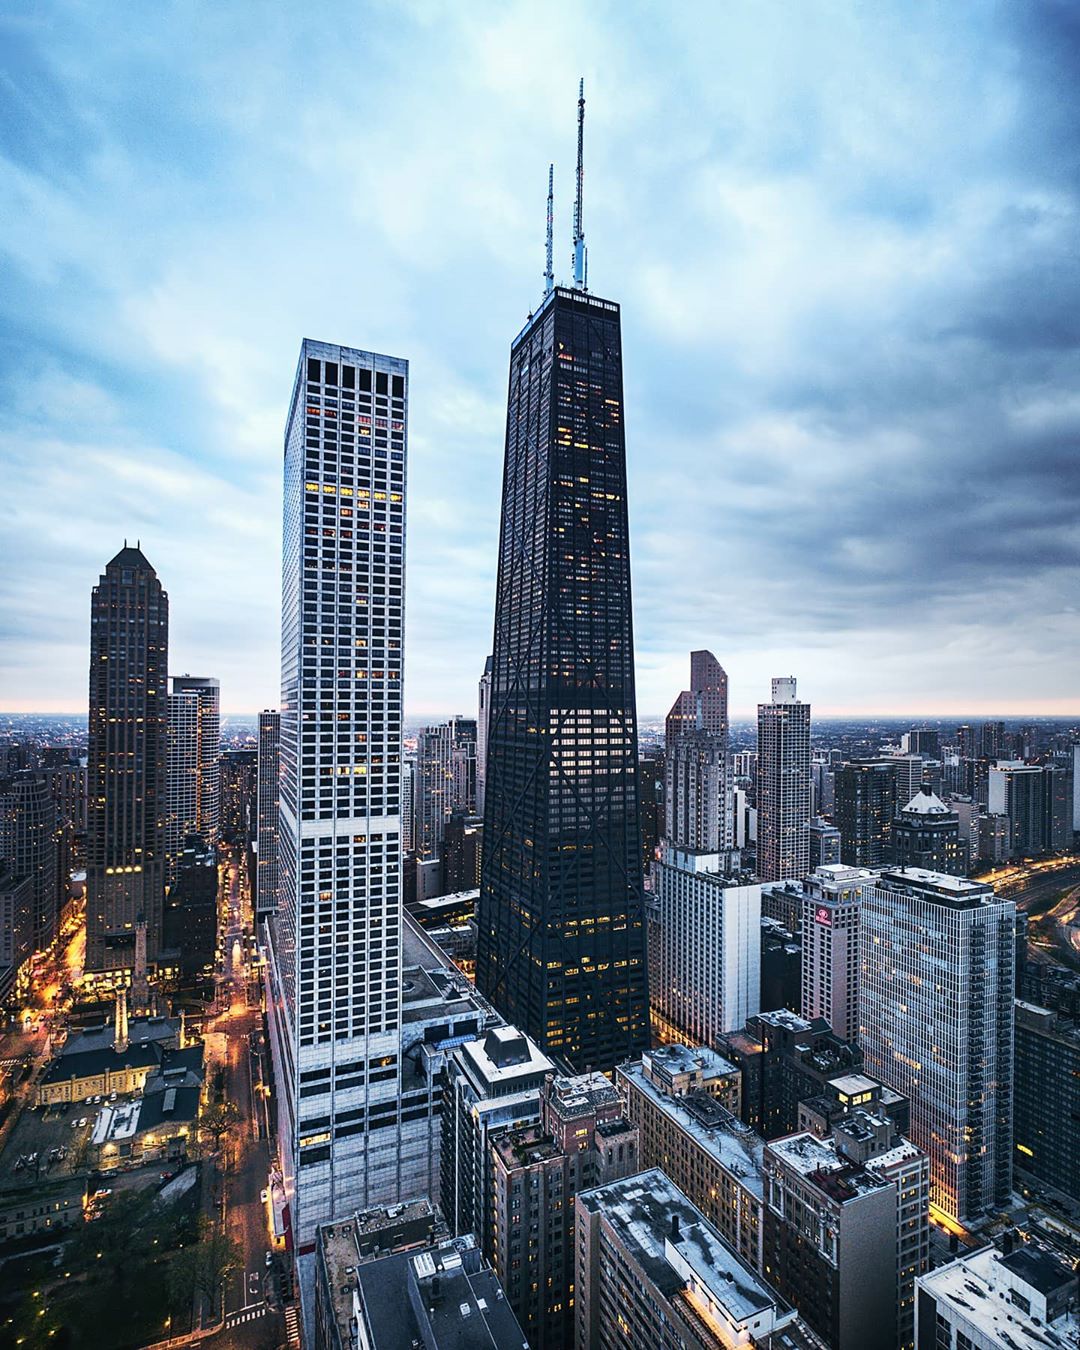 The John Hancock Building in Chicago at Dusk. Photo by Instagram user @jamielinkphotography